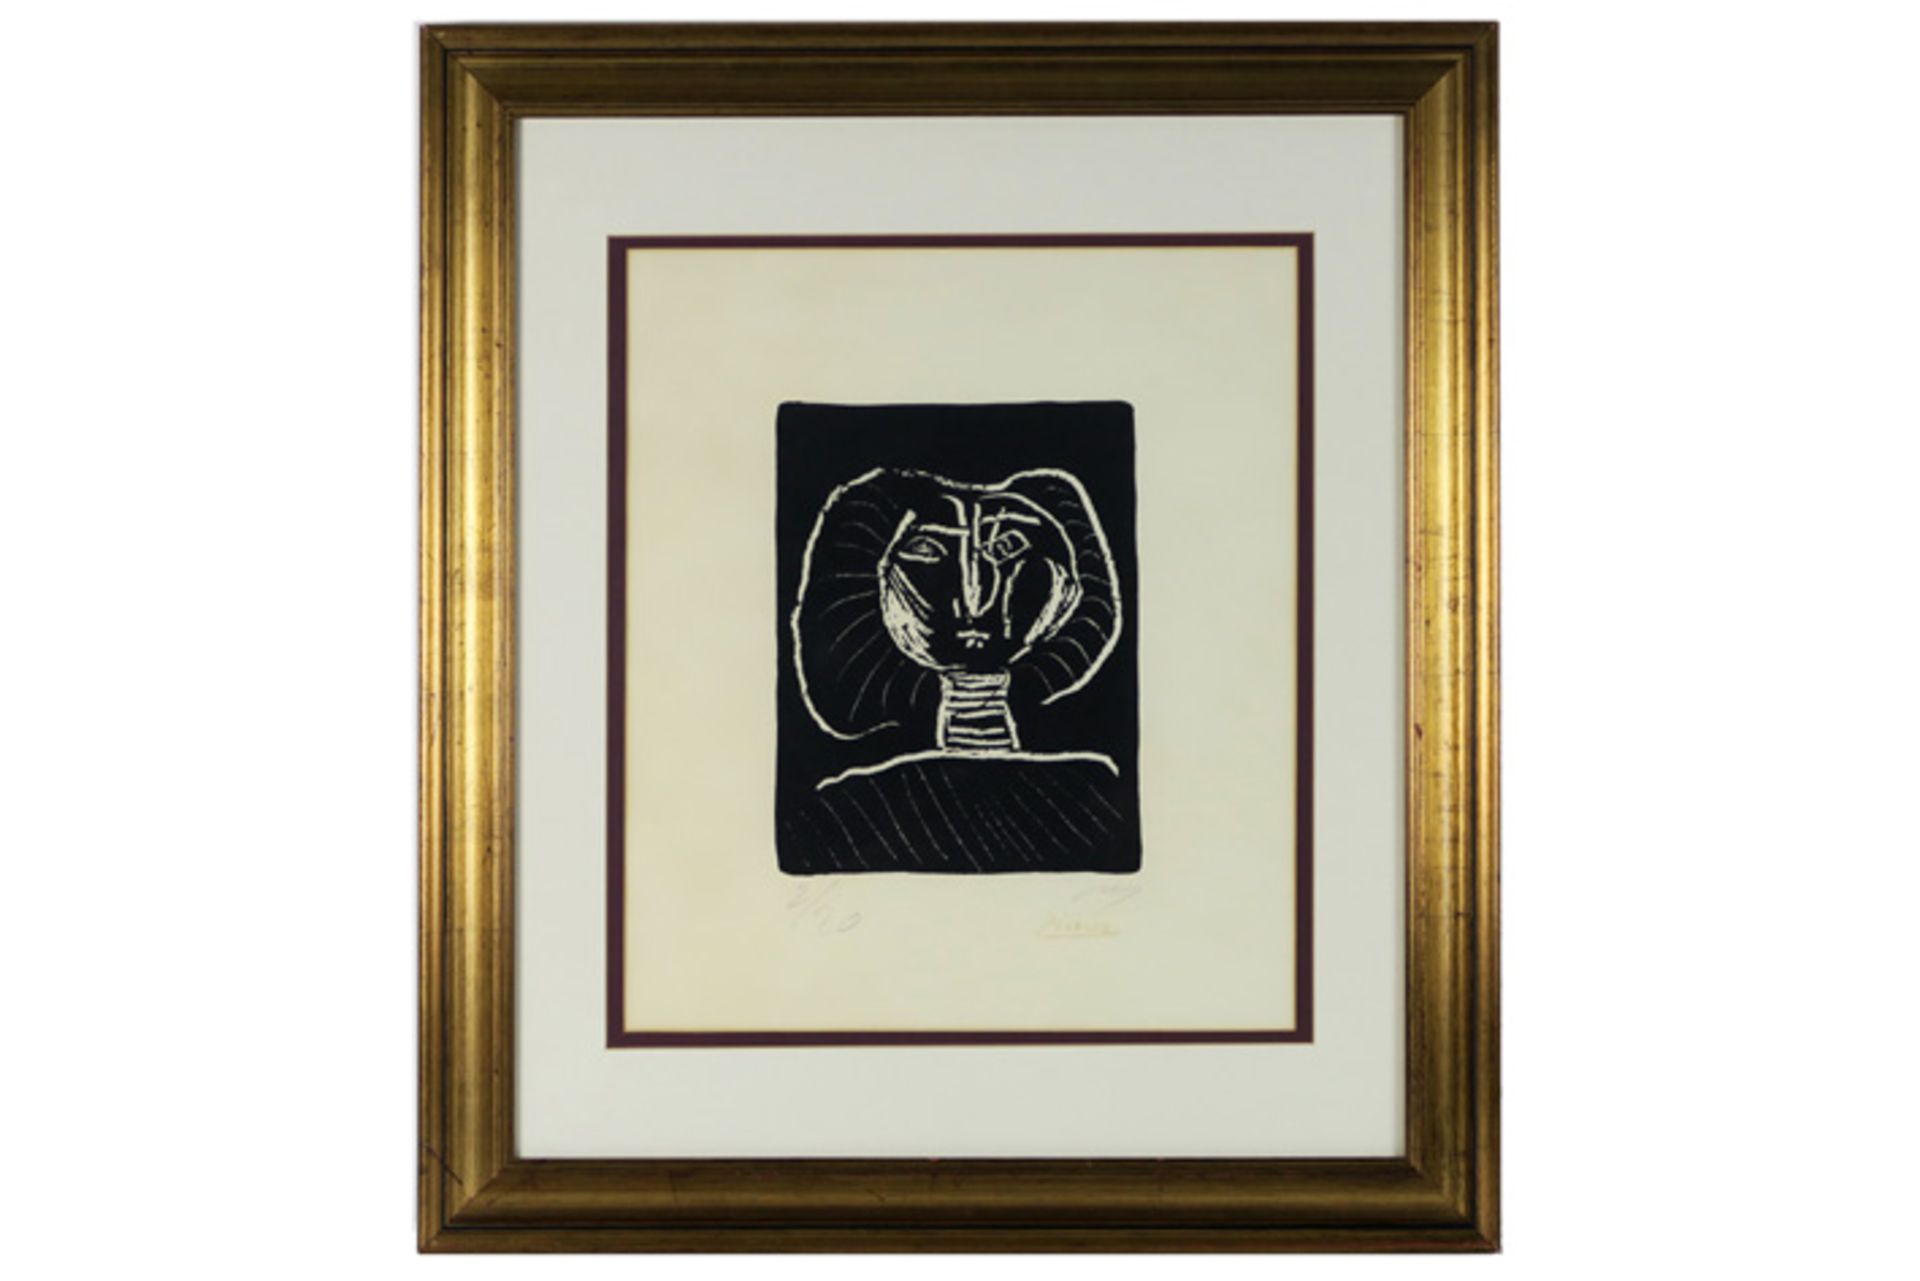 signed Pablo Picasso linocut with a portrait of lady PICASSO PABLO, DIEGO, JOSÉ (1881 - 1973) - Image 3 of 3